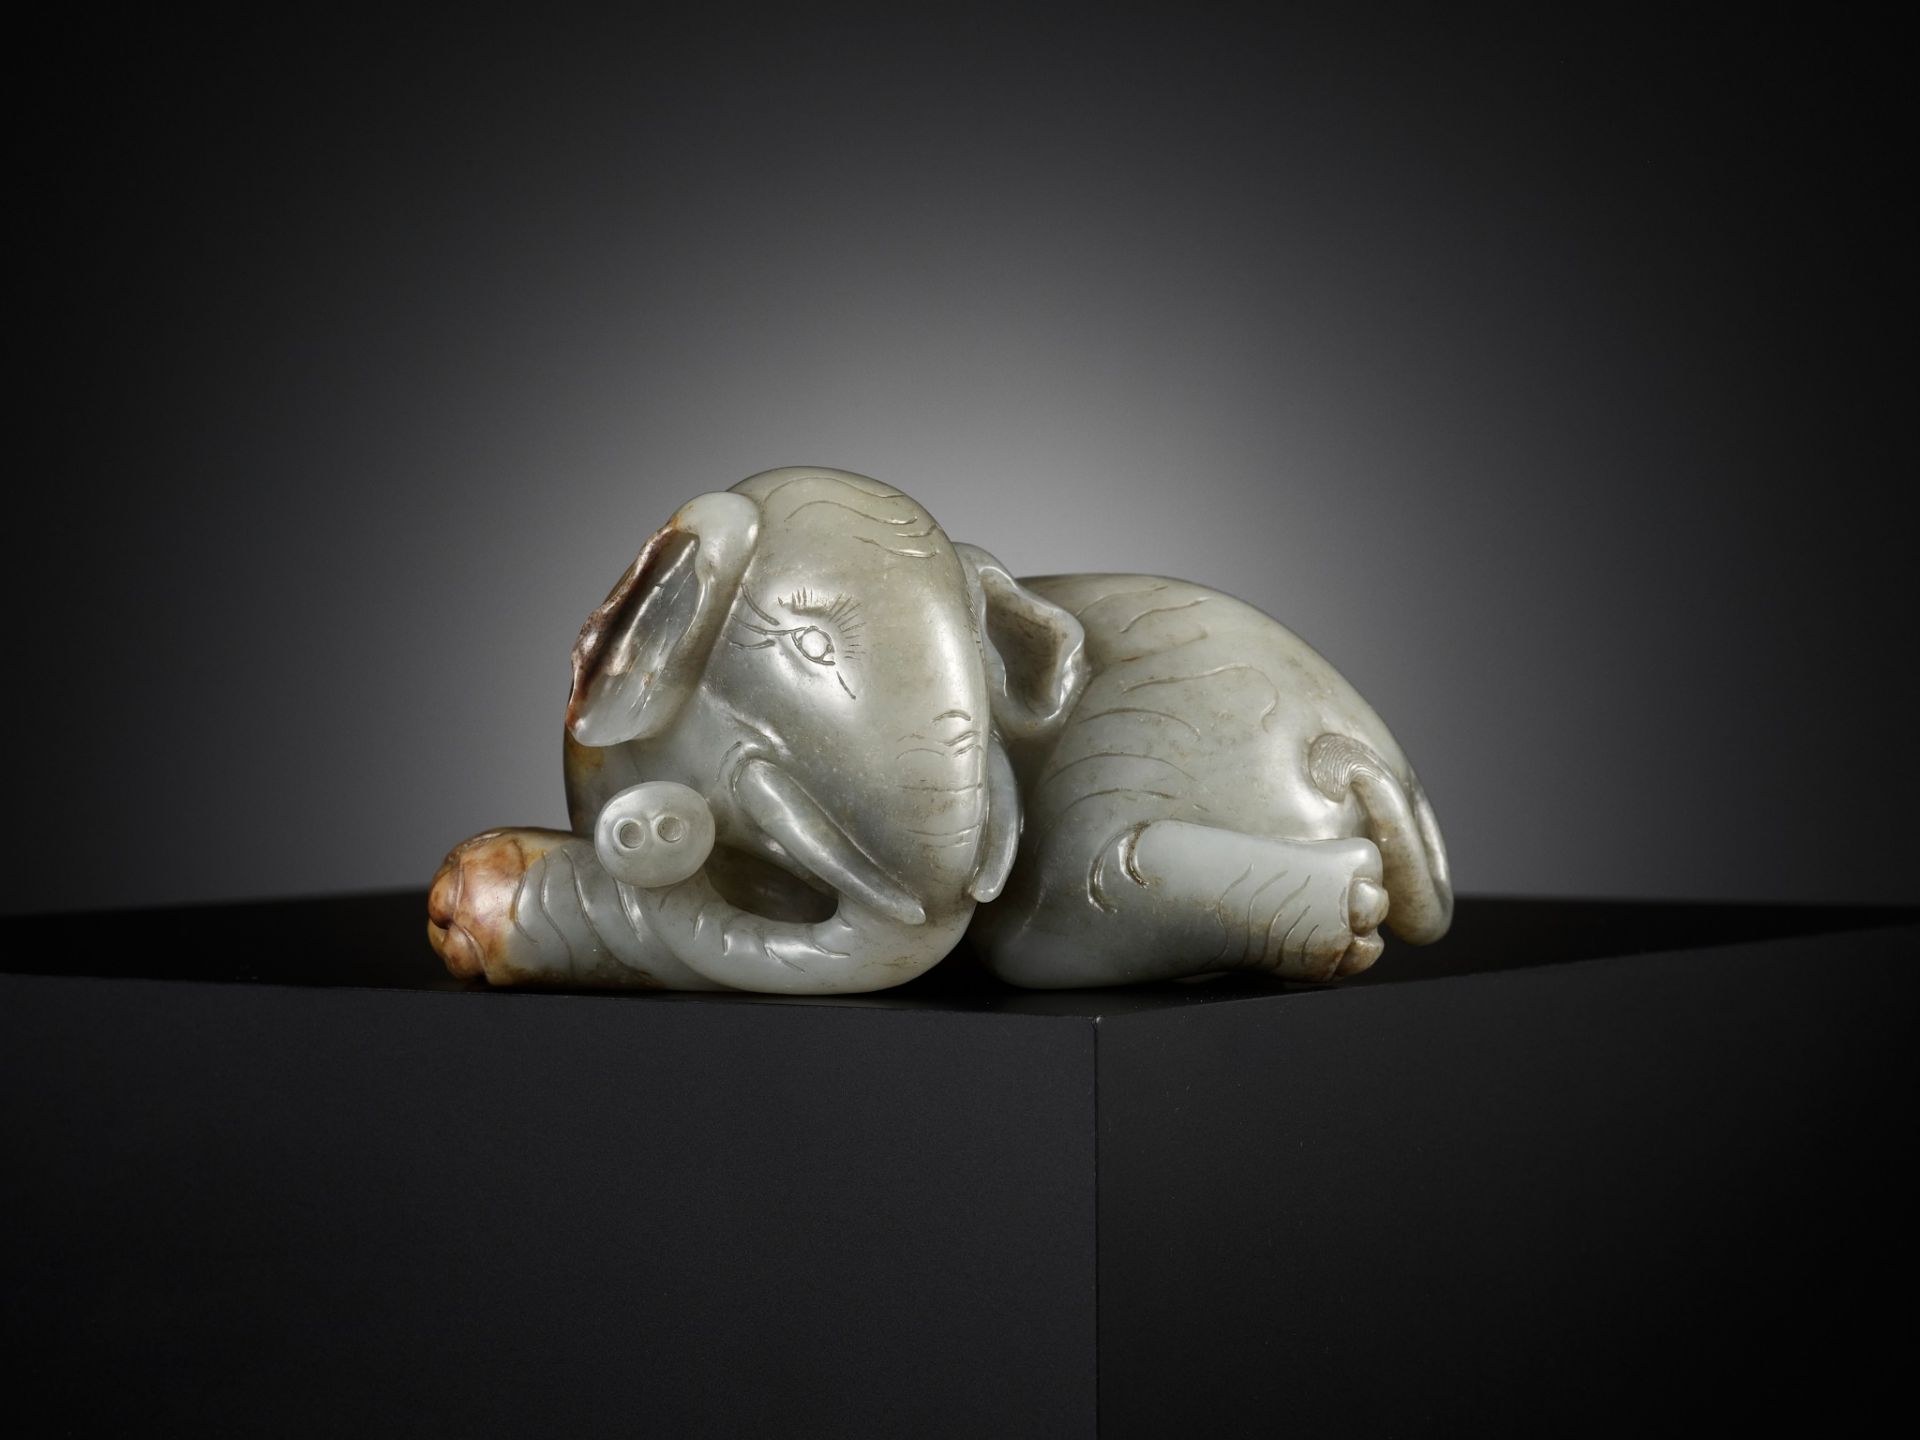 A GRAY AND RUSSET JADE FIGURE OF A RECUMBENT ELEPHANT, LATE MING TO MID-QING DYNASTY - Image 2 of 15